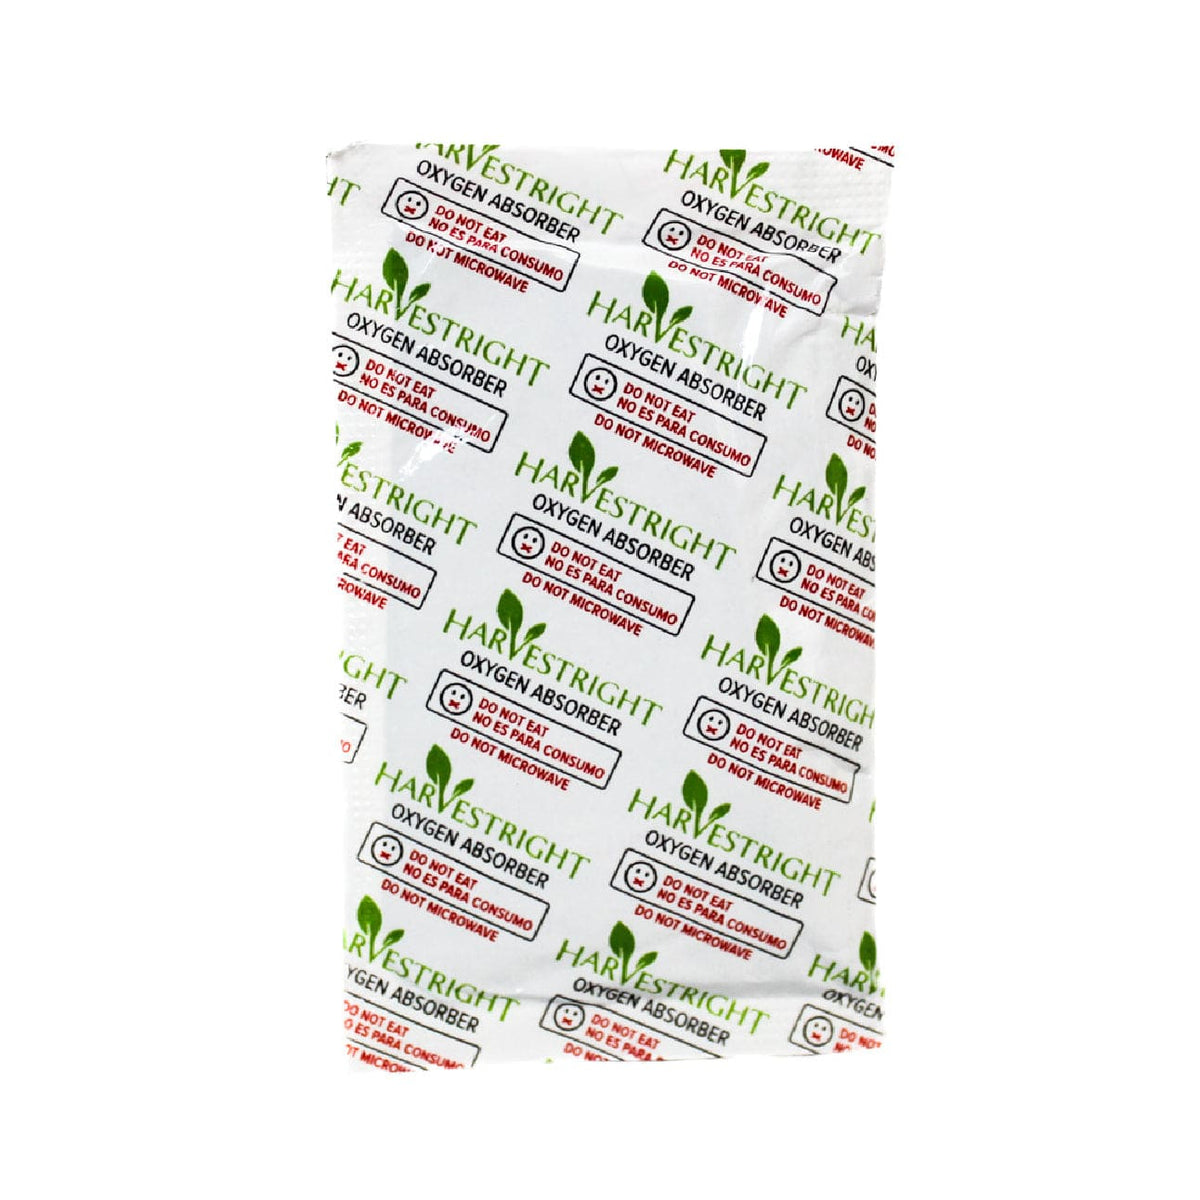 Harvest Right Harvest Right Oxygen Absorbers (300-Pack)